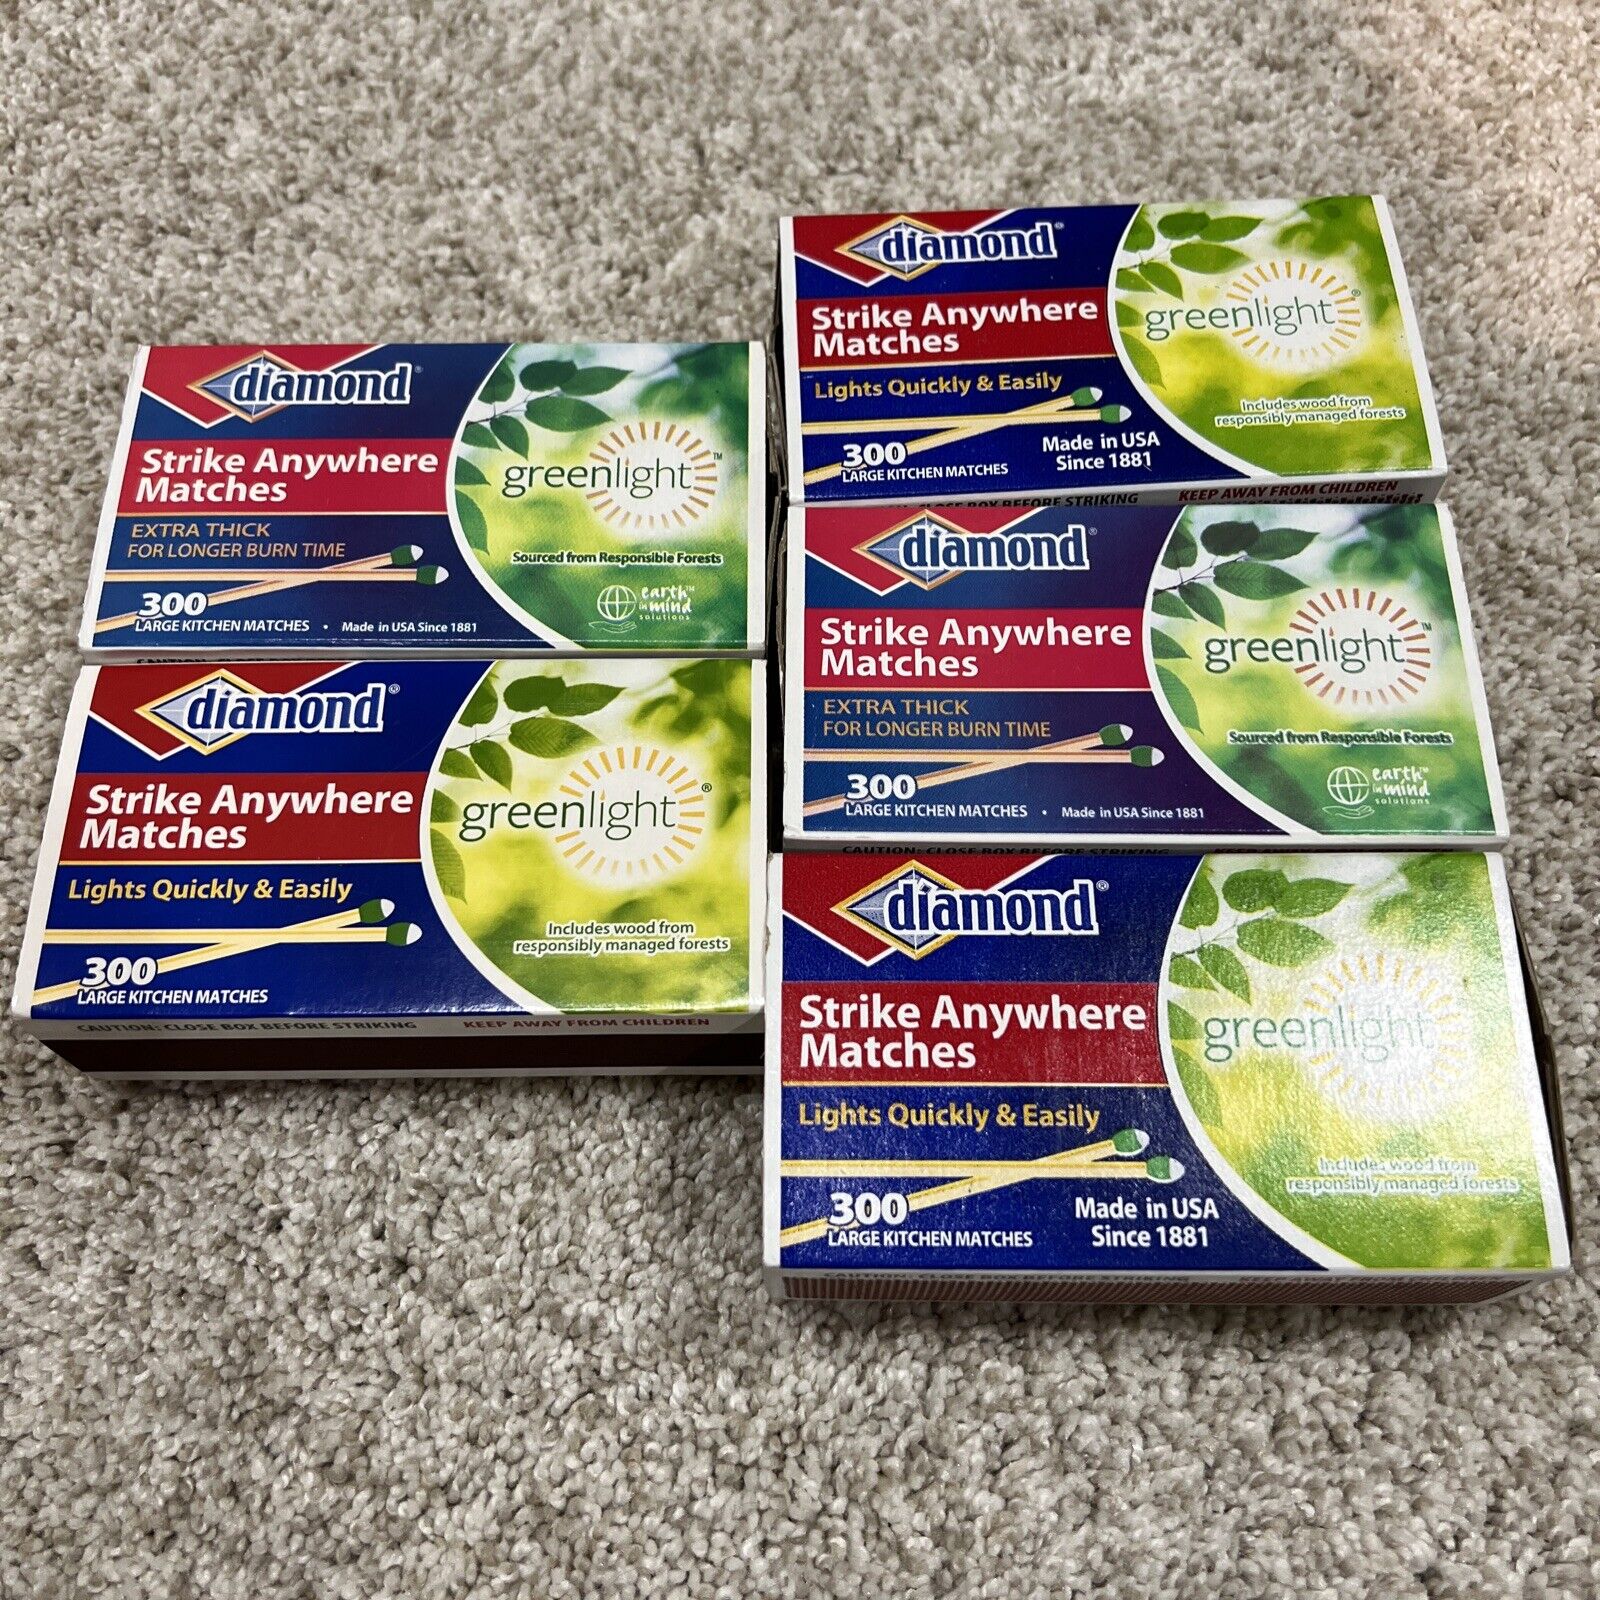 (5 Boxes) Greenlight Diamond Strike Anywhere Matches 300 Count Boxes